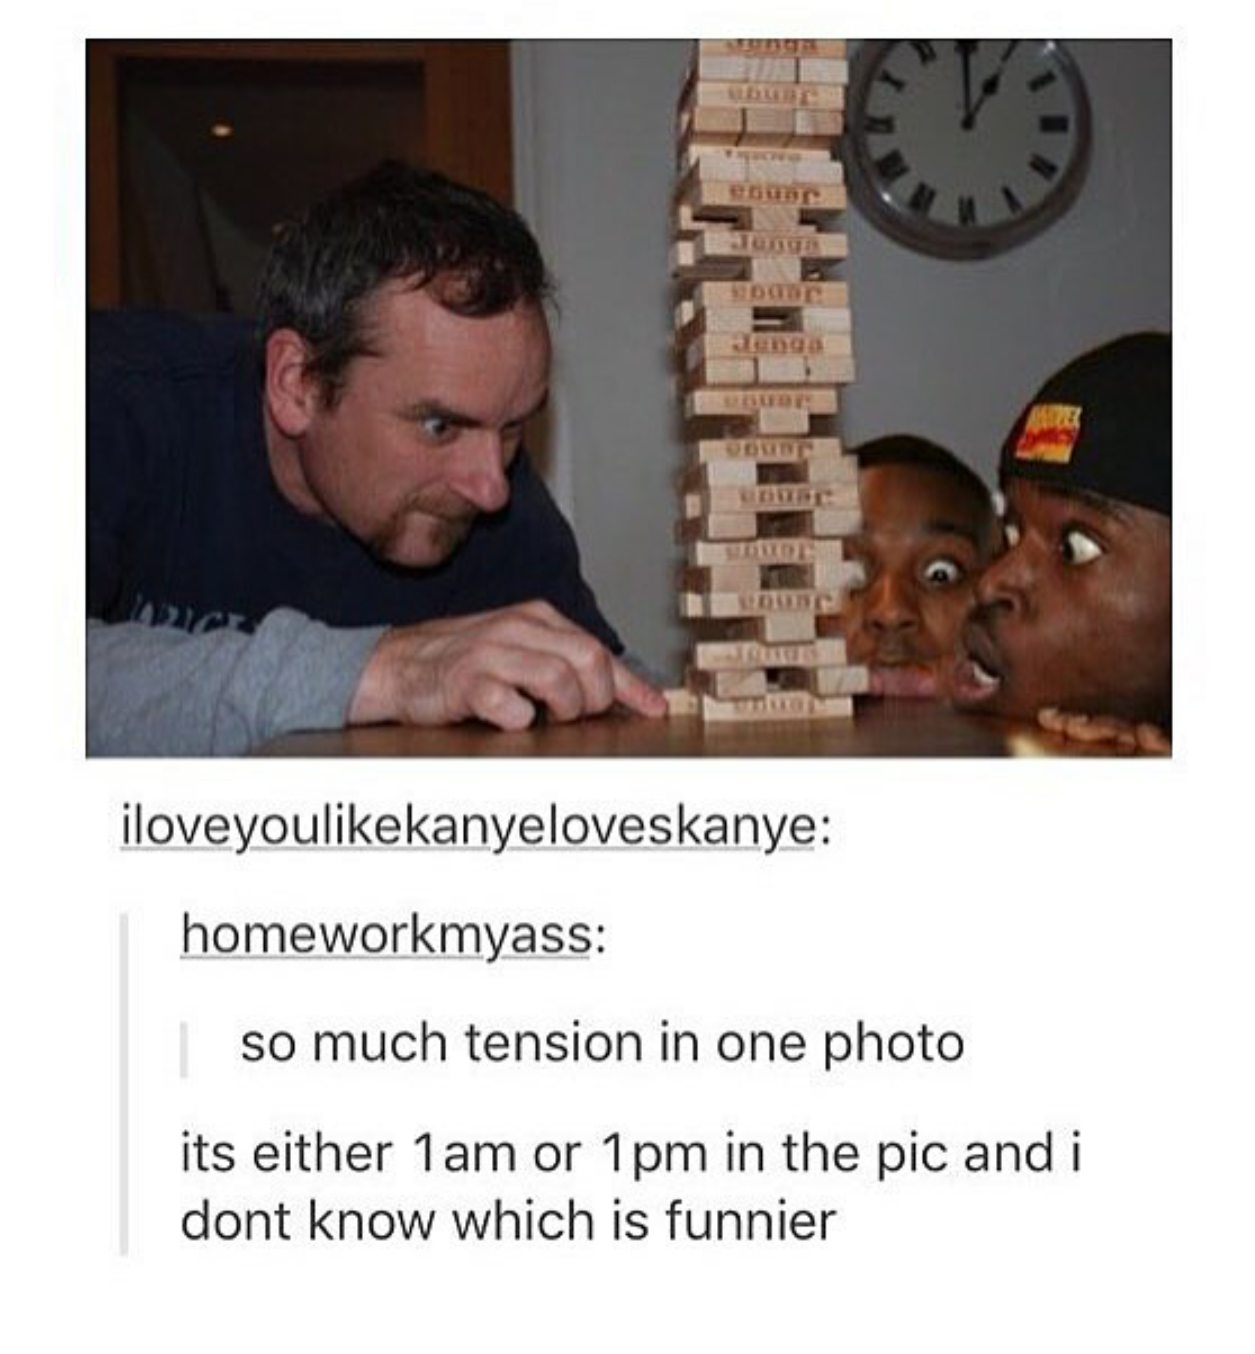 anytime is jenga time - iloveyoukanyeloveskanye homeworkmyass so much tension in one photo its either 1am or 1pm in the pic and i dont know which is funnier